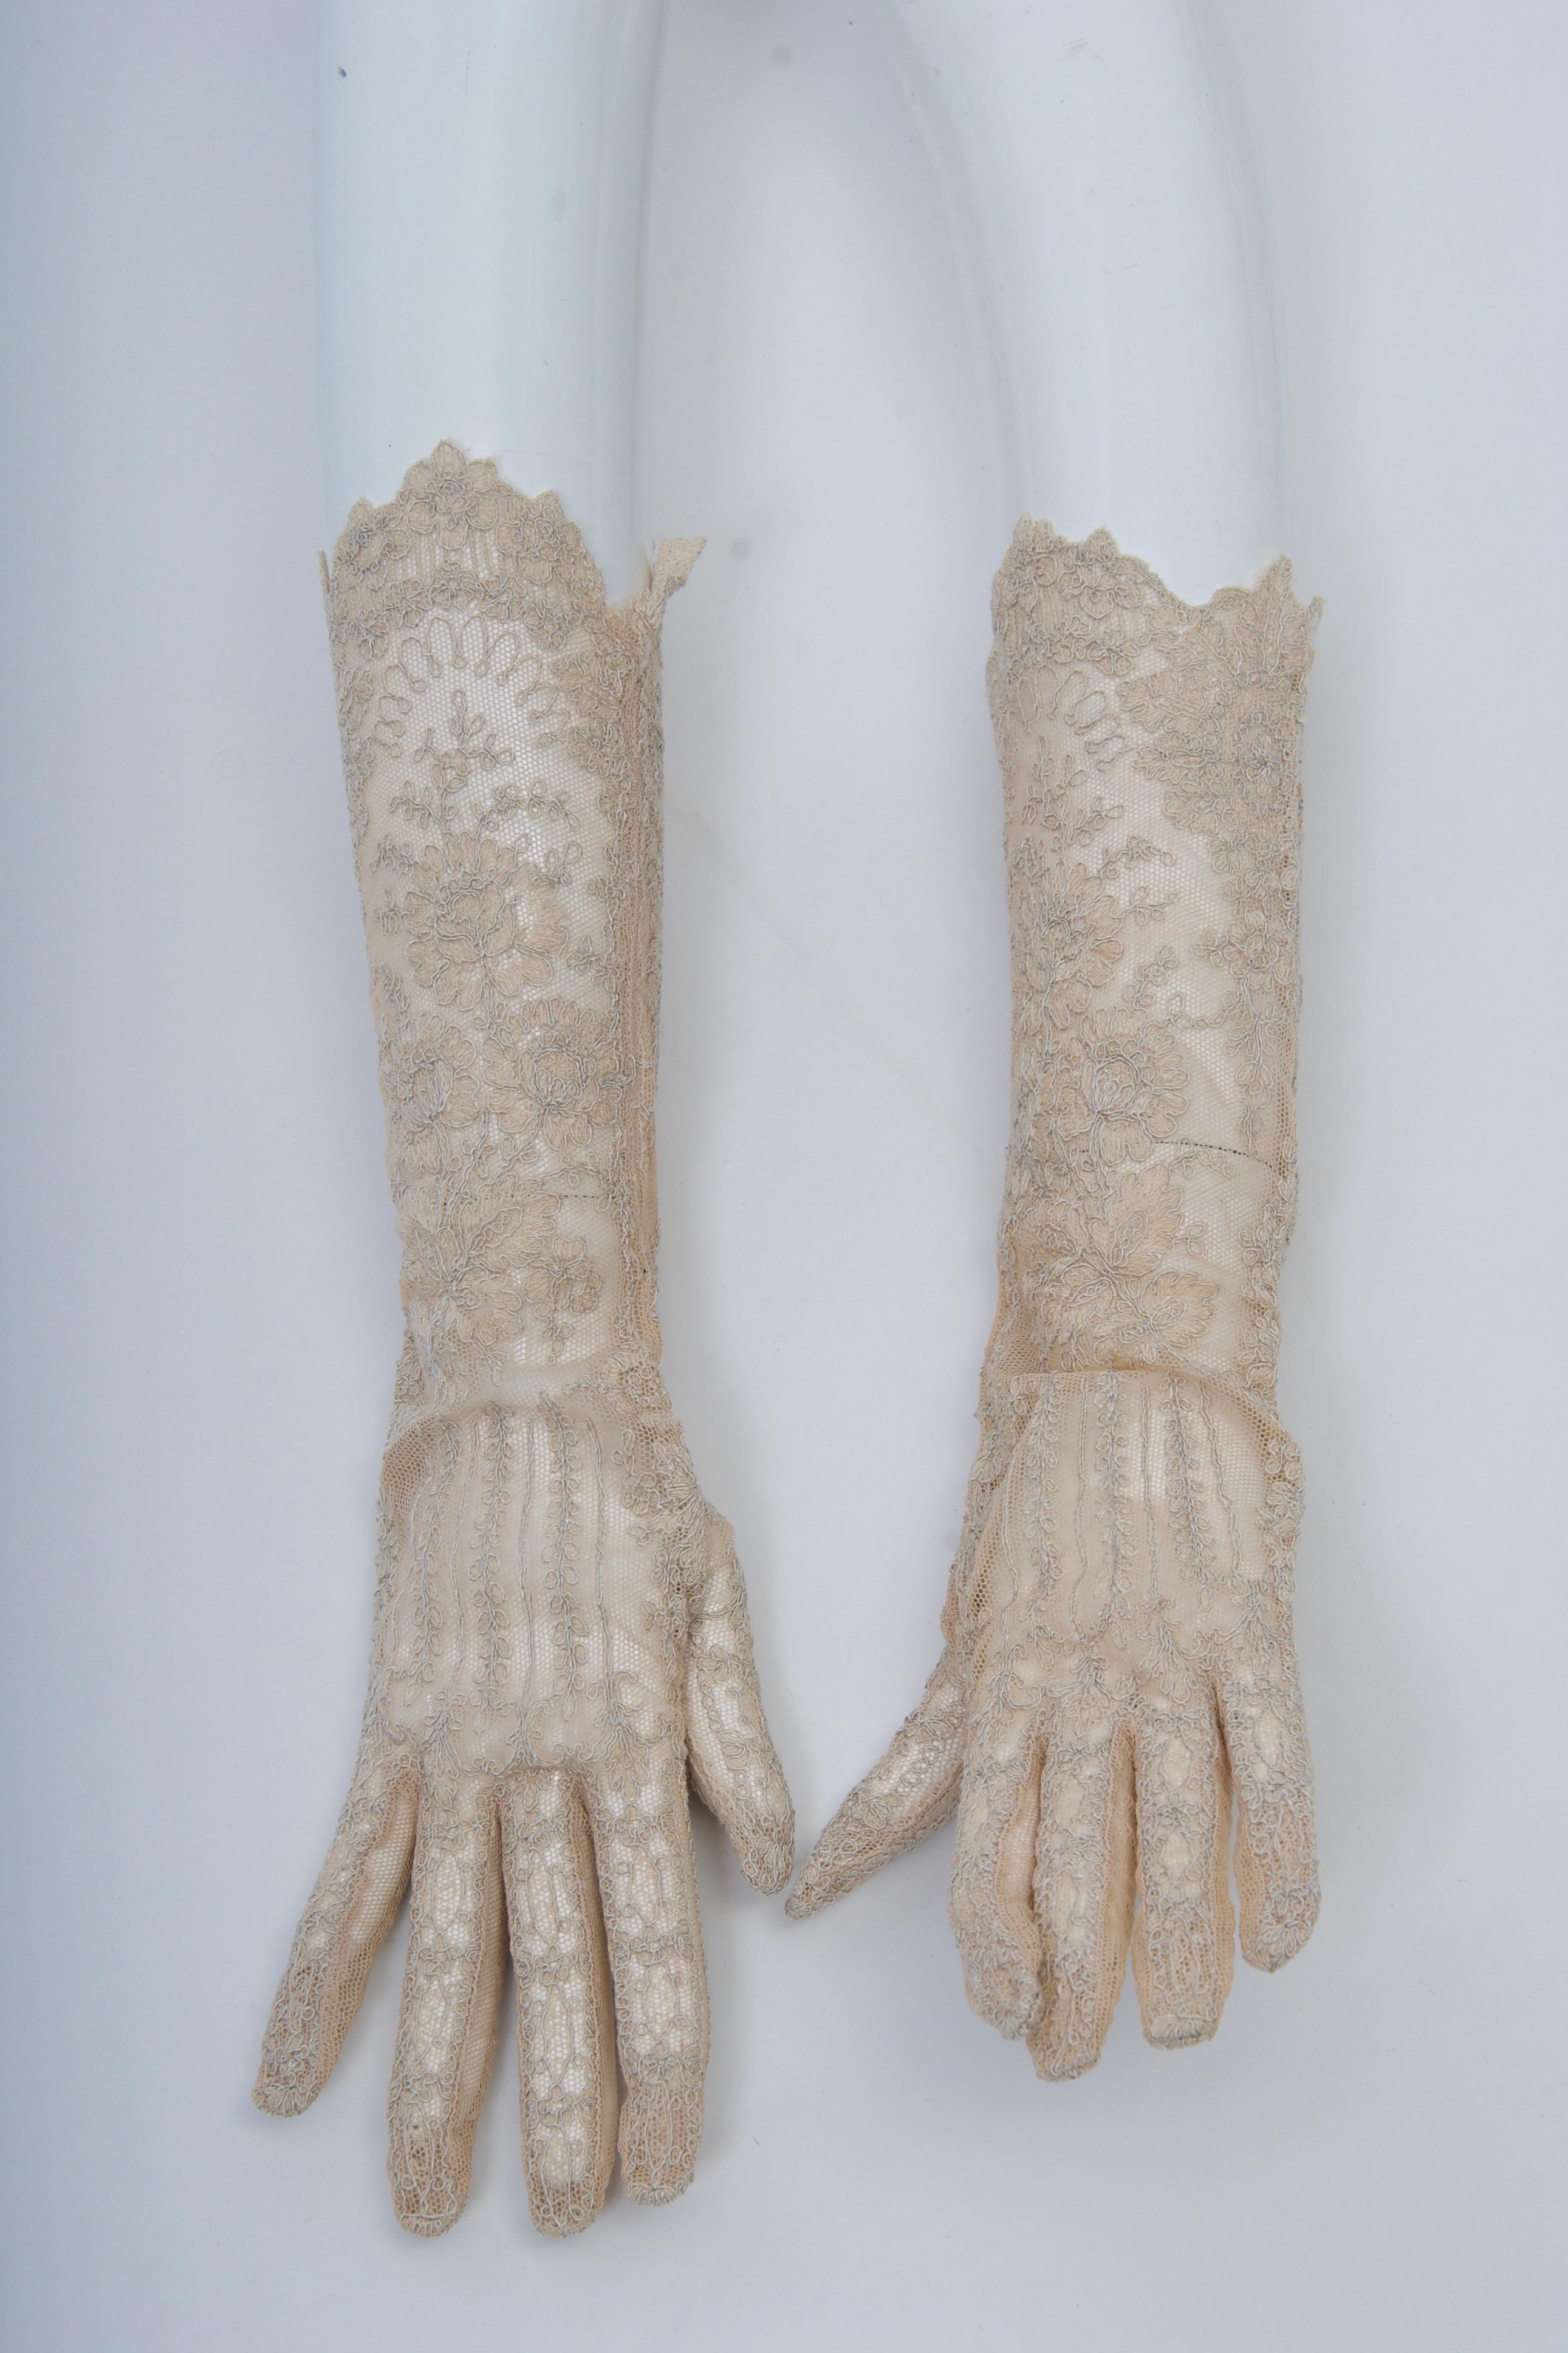 Vintage beige lace gloves, mid length, top edge follows lace pattern. Some stretch, approximate size M 7-7 1/2.